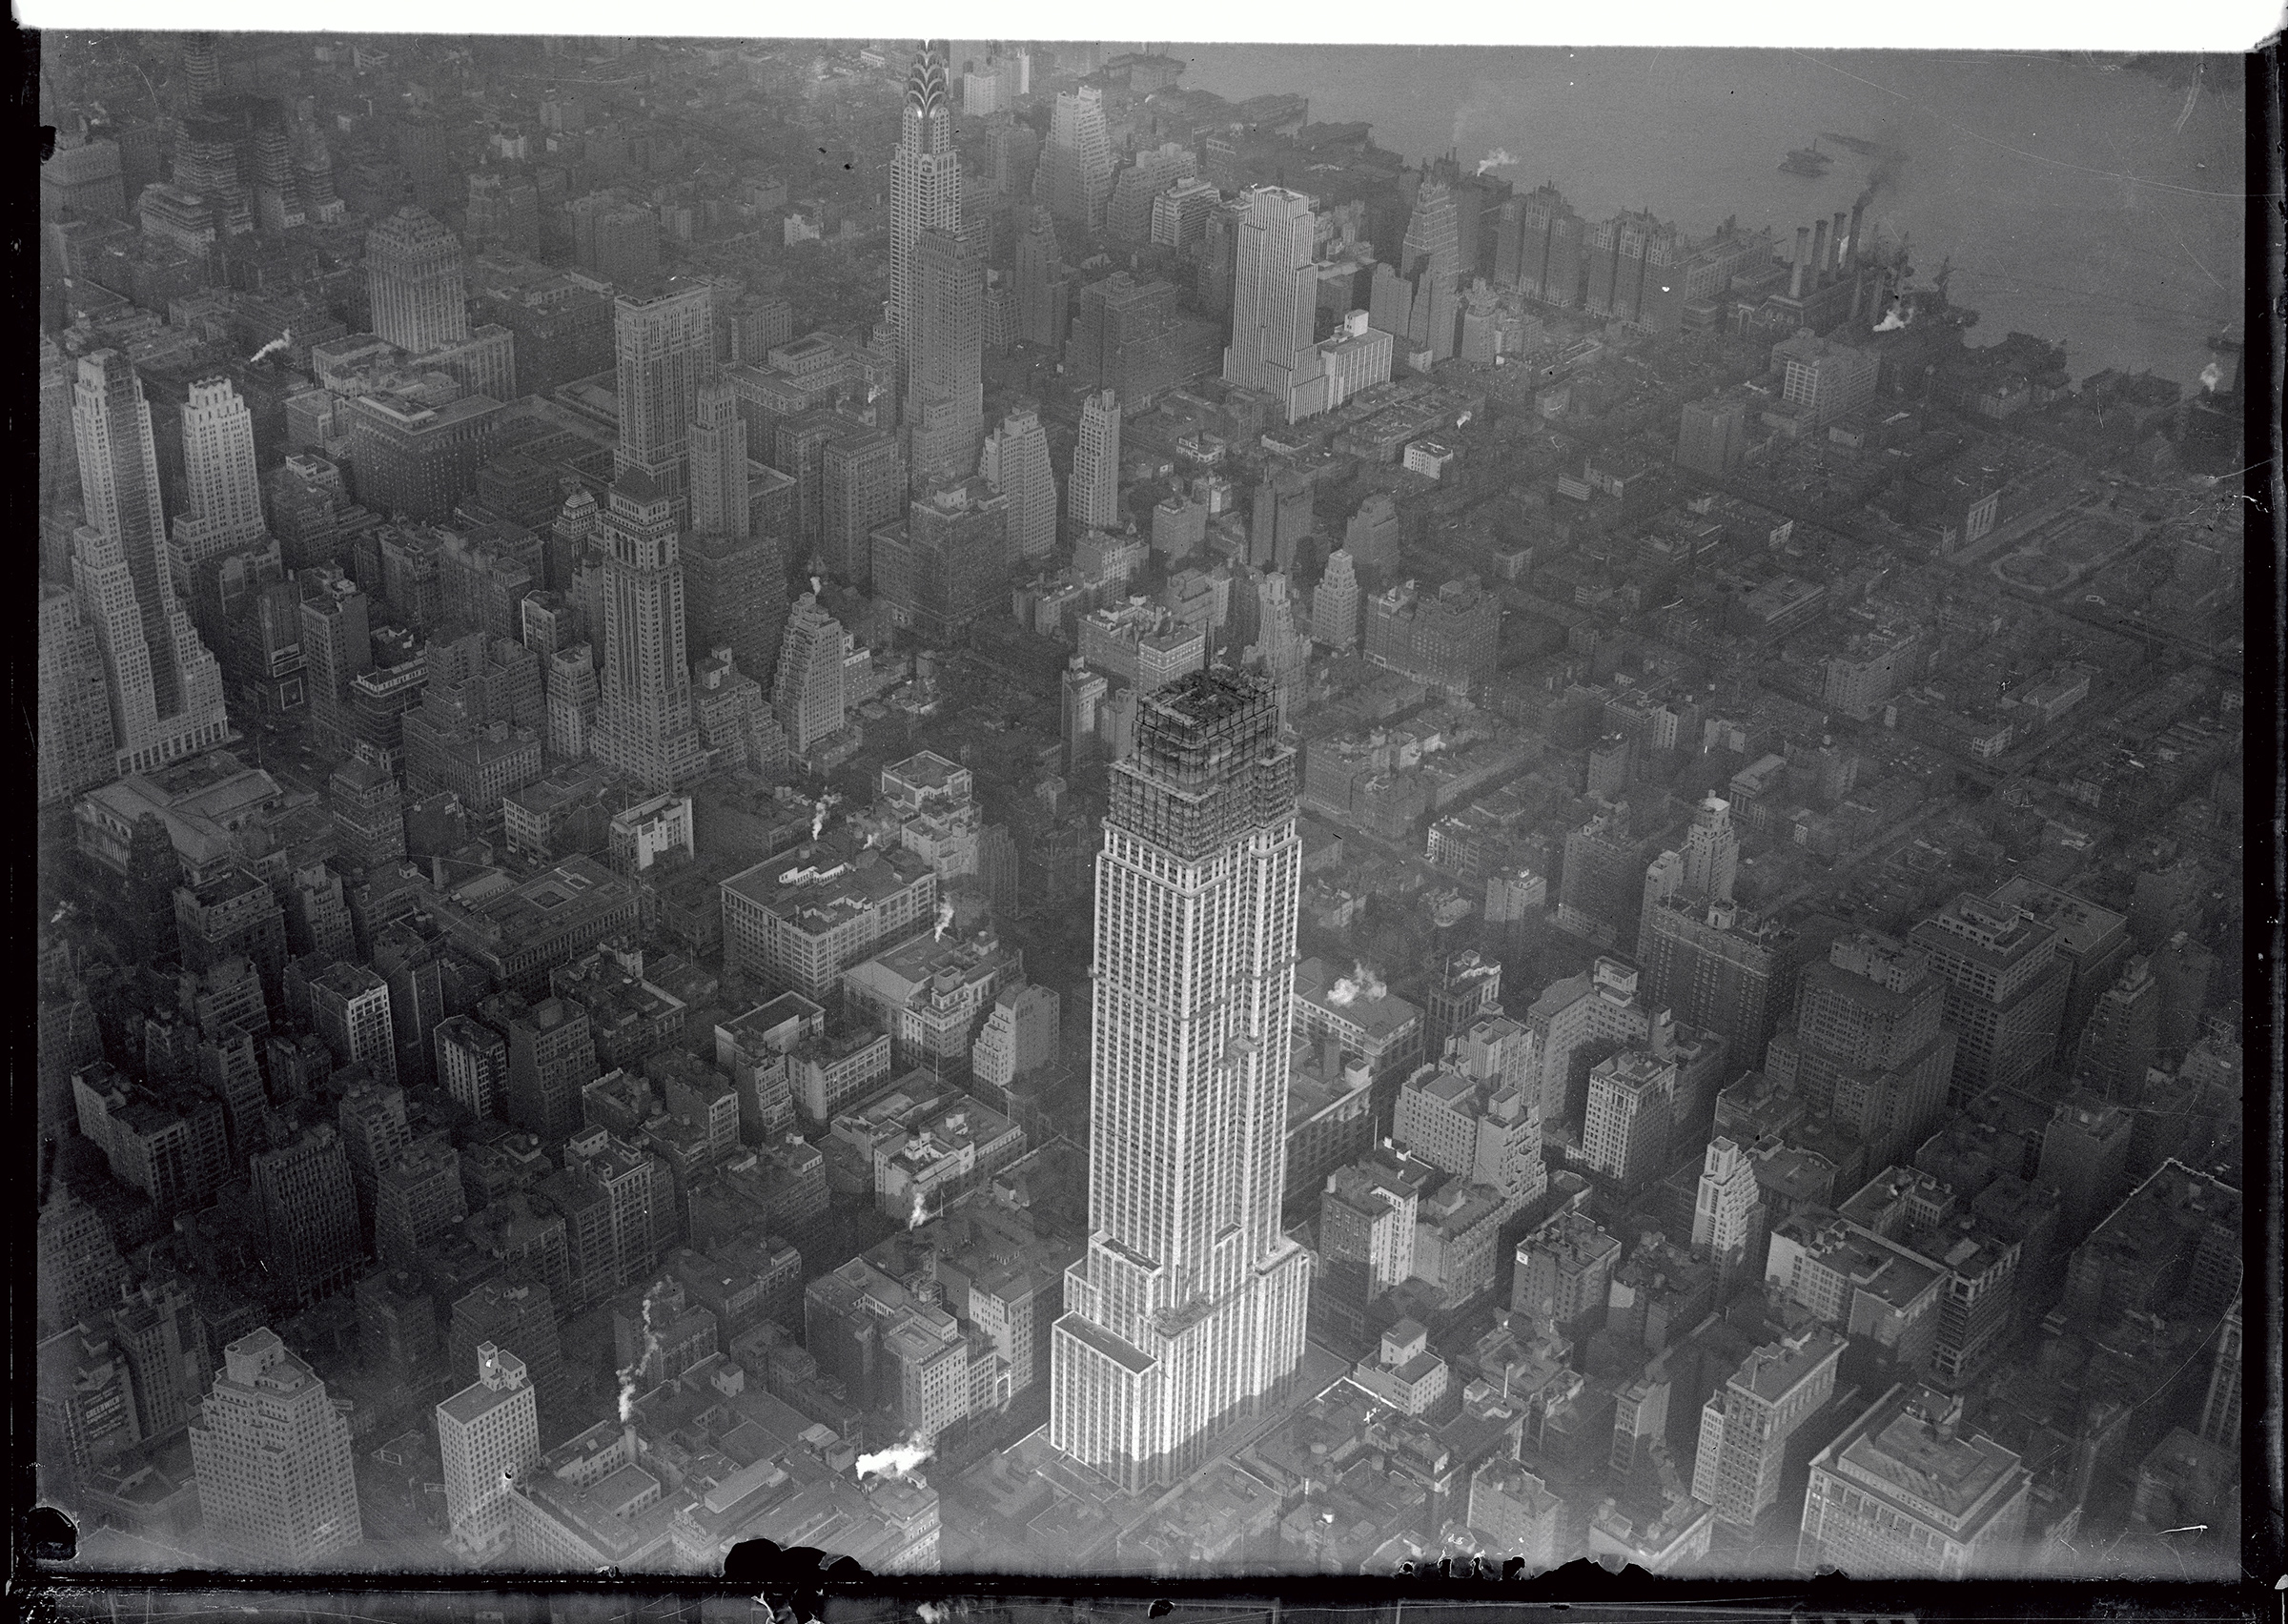 An aerial photograph of The Empire State Building from October 1930. At the time, there were 88 stories finished.